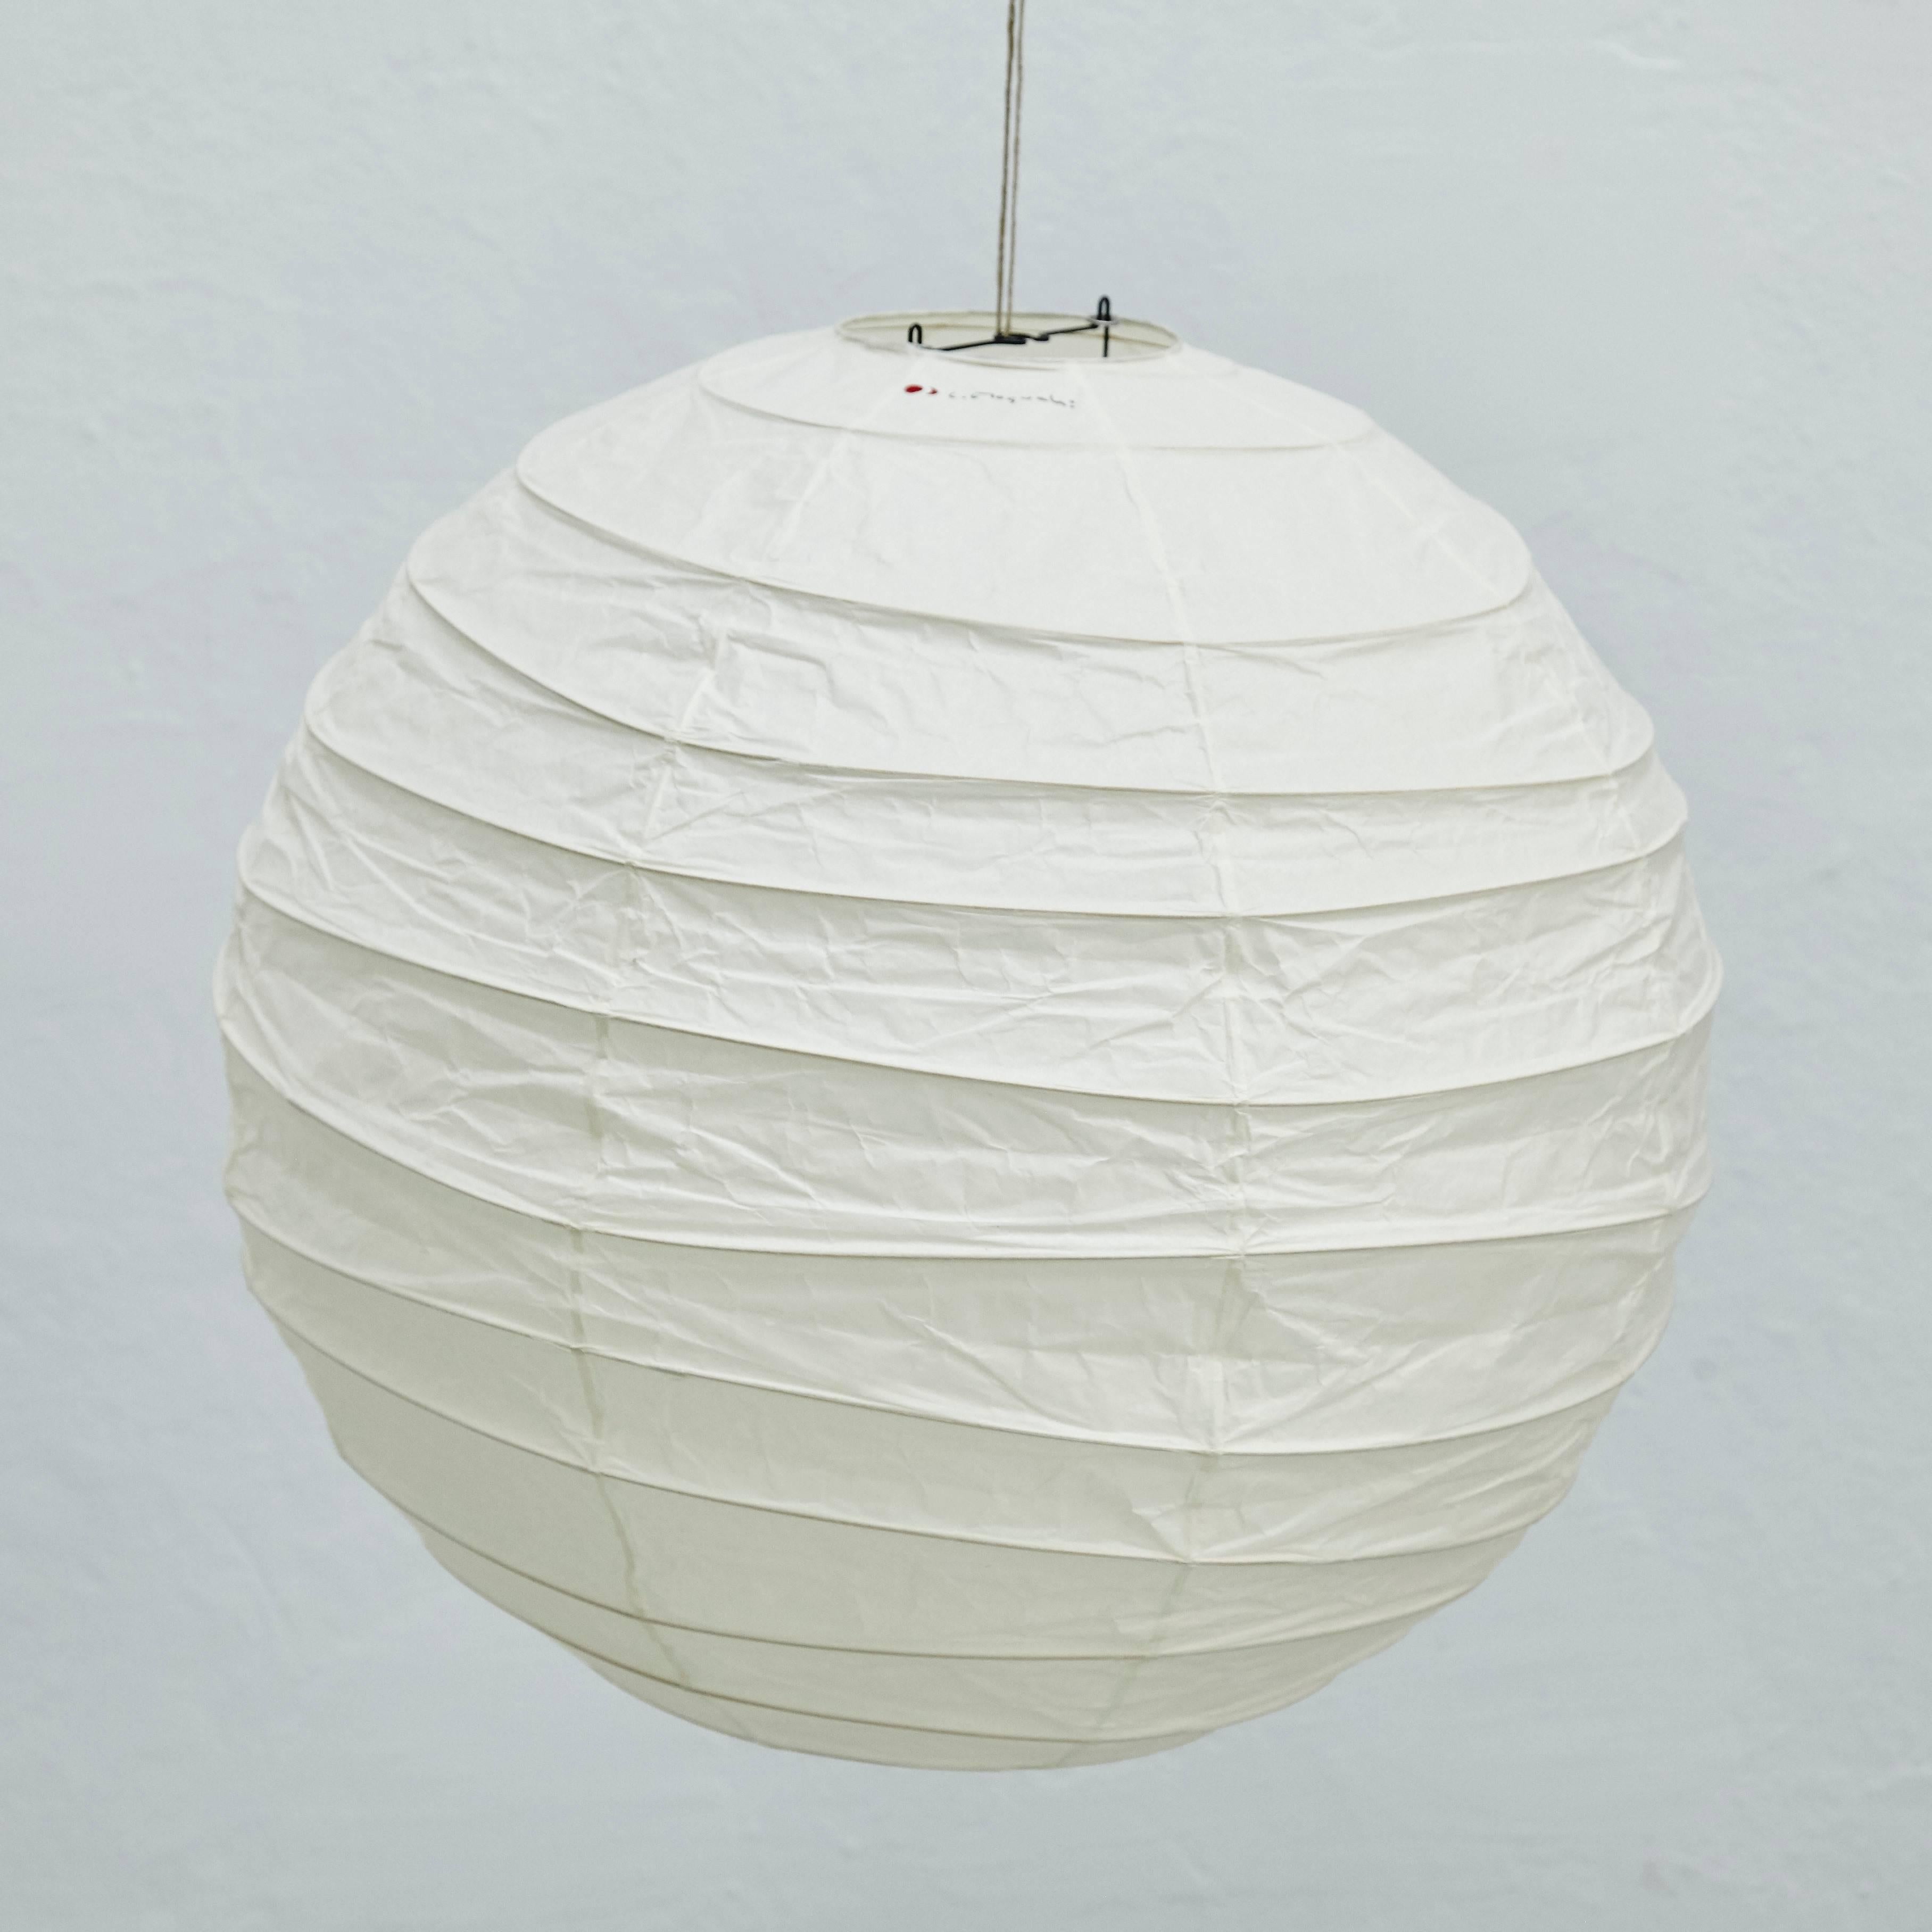 Ceiling lamp, model 36N, designed by Isamu Noguchi, circa 1950.
Manufactured by Ozeki & Company Ltd. (Japan).
Bamboo ribbing structure covered by washi paper manufactured according to the traditional procedures.

In good condition, with some